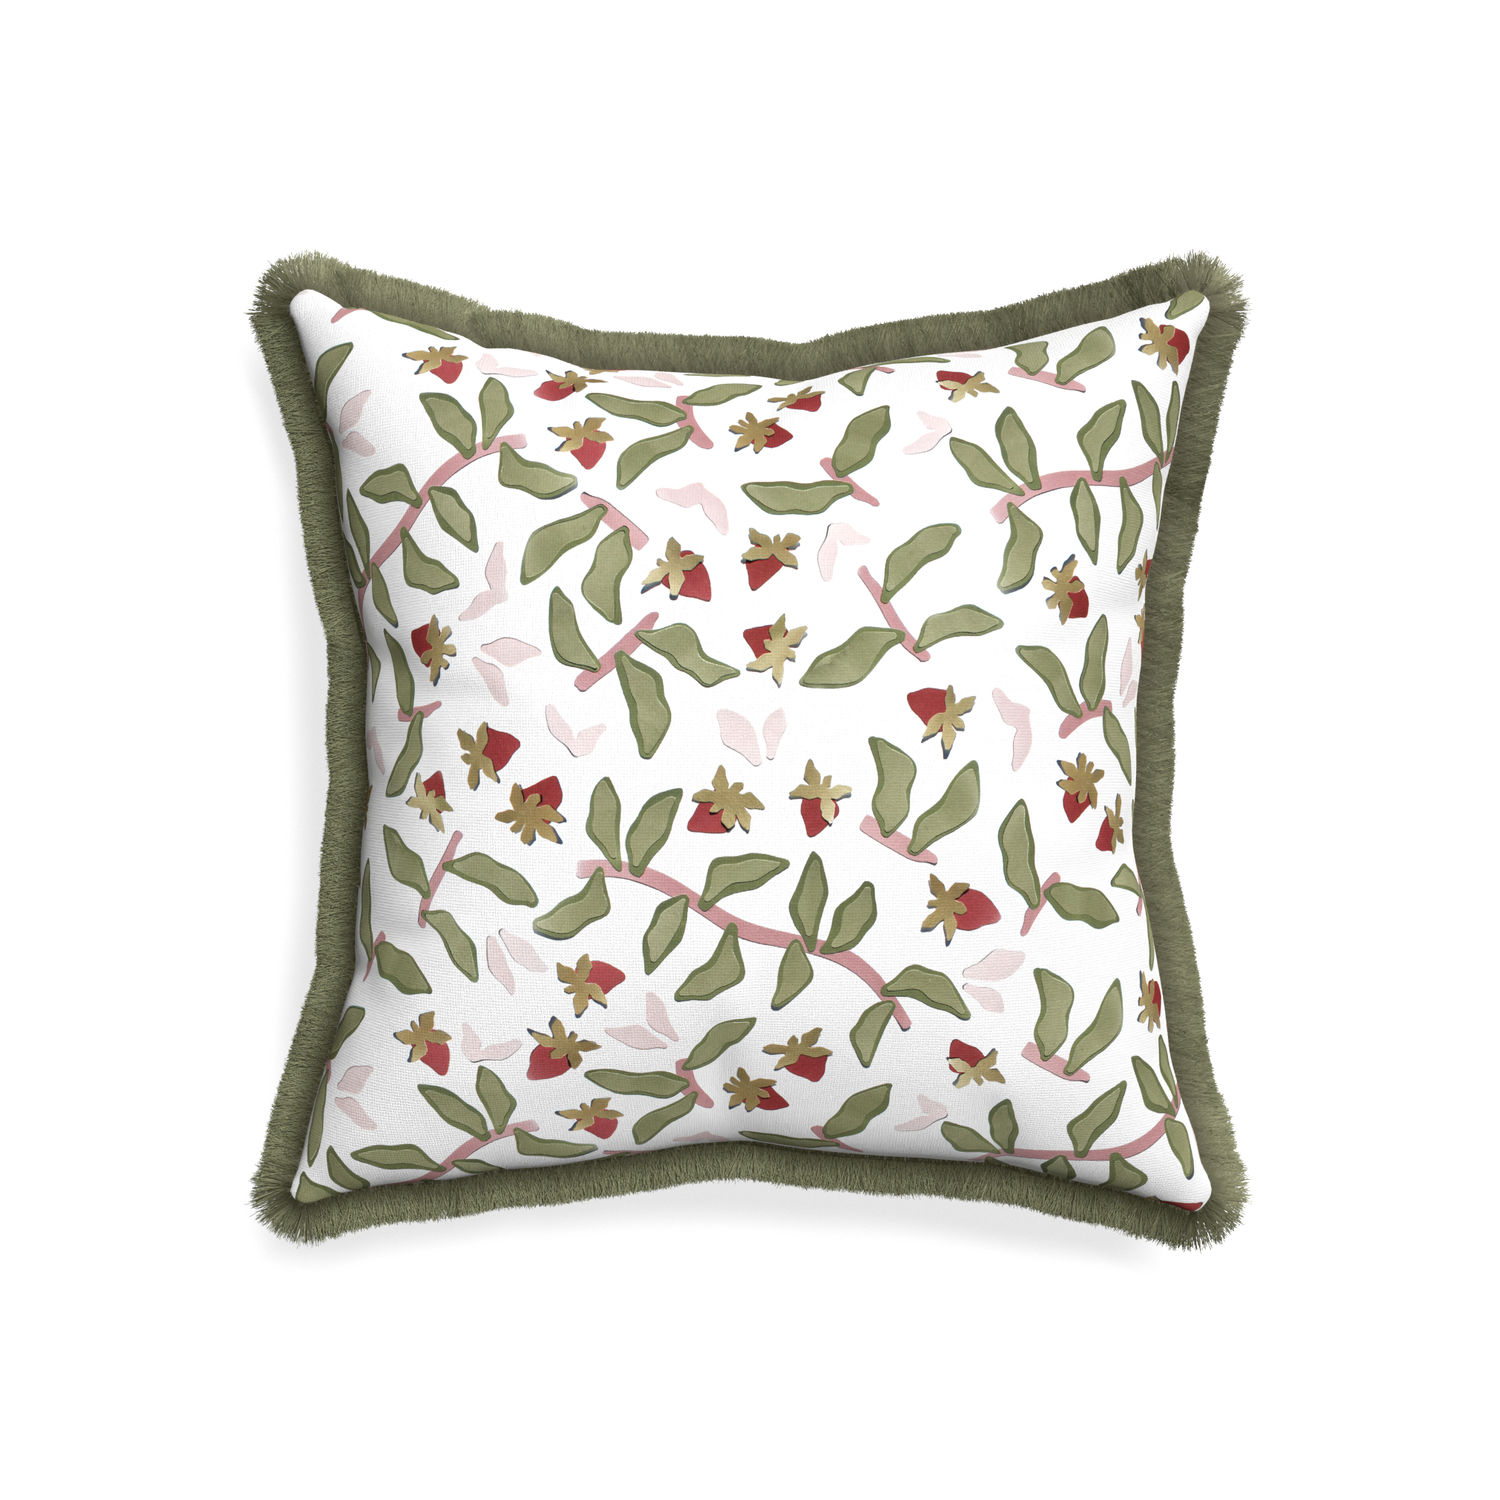 20-square nellie custom pillow with sage fringe on white background